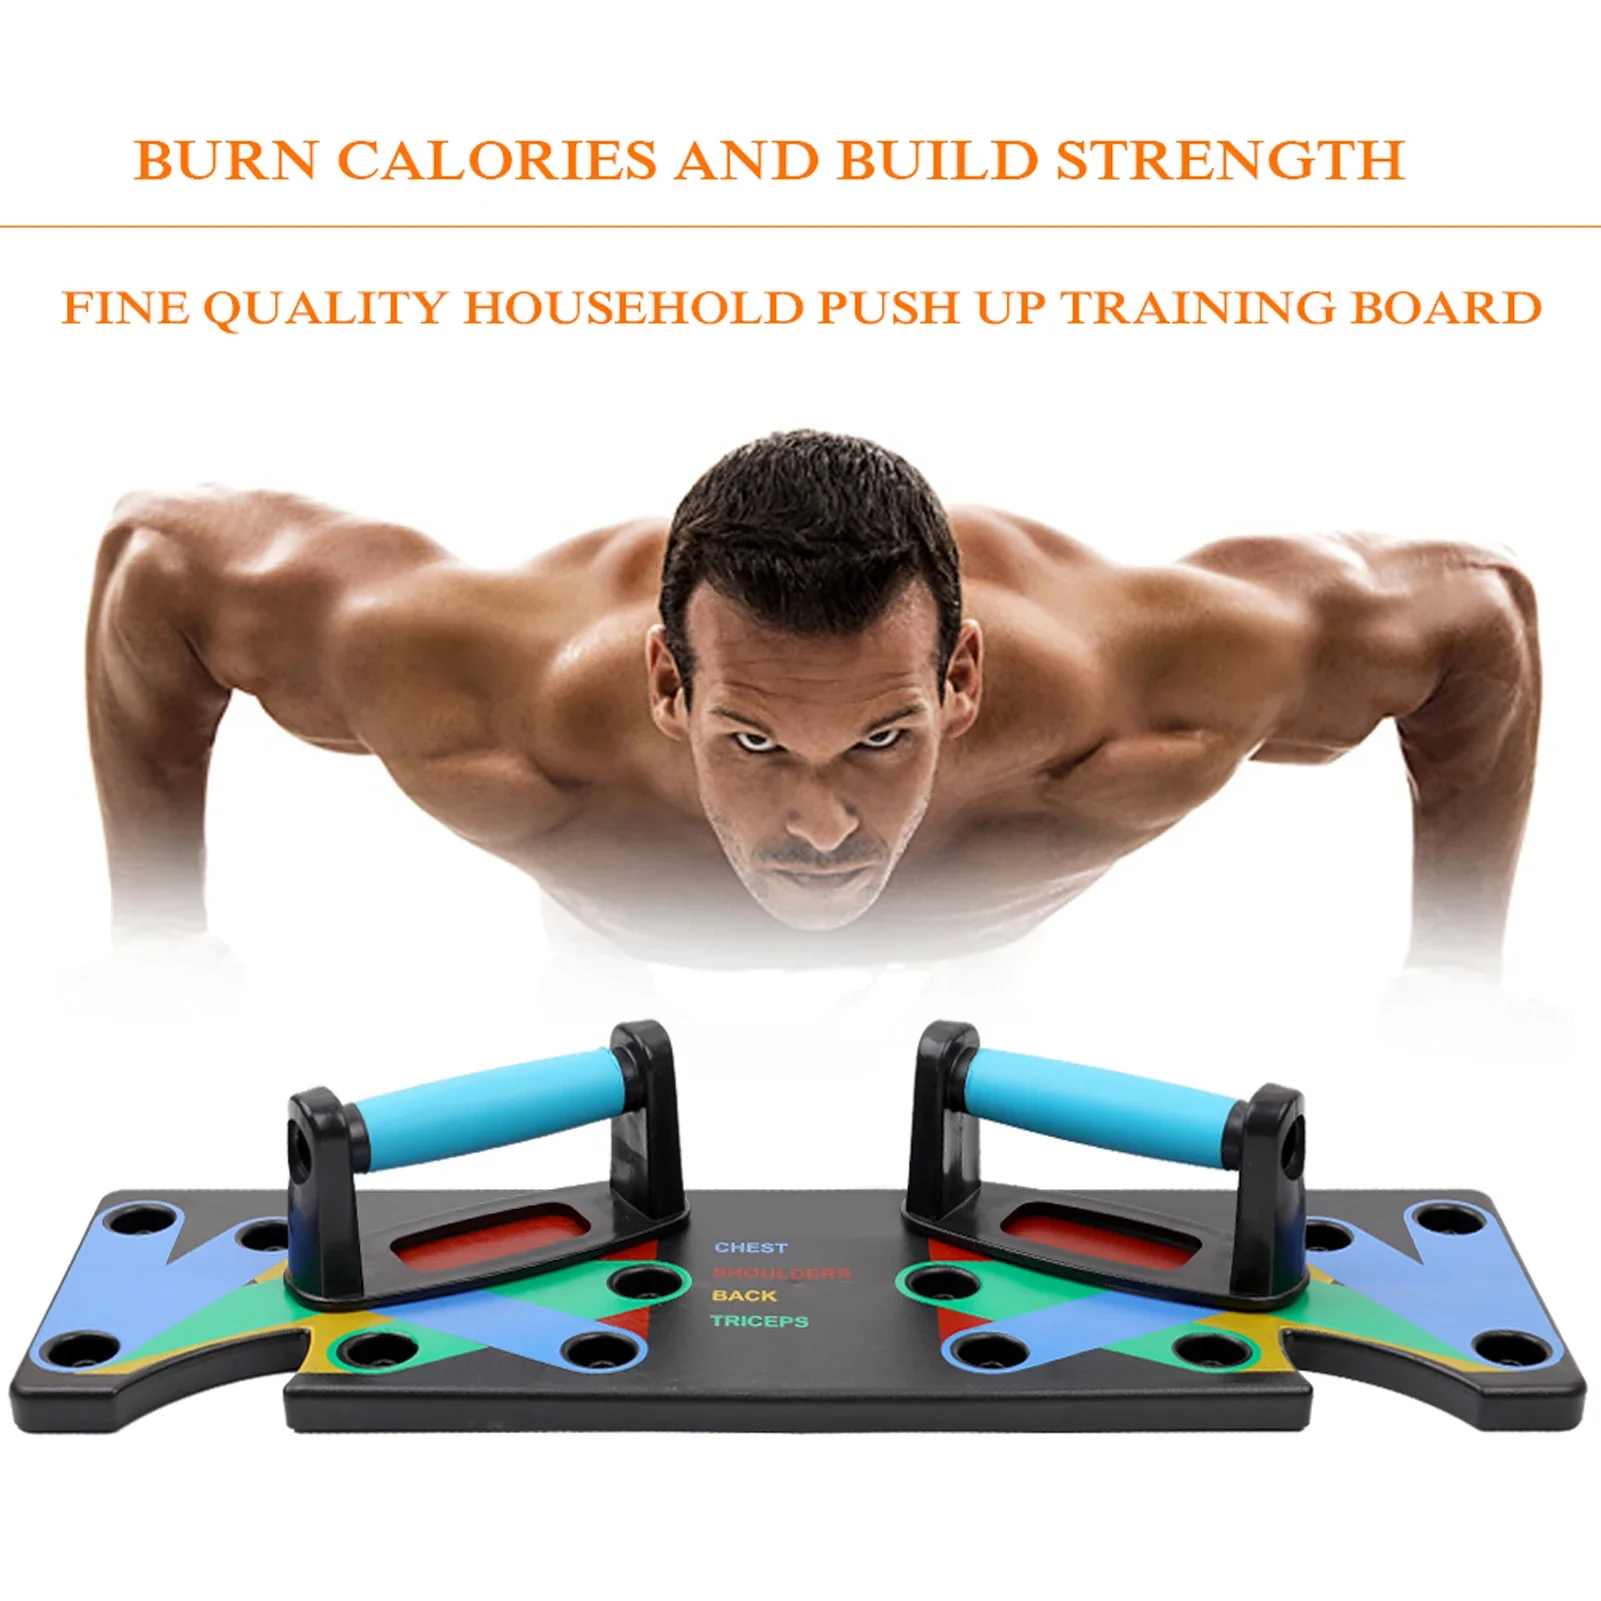 

9 in 1 Push Up Rack Board Comprehensive Fitness Exercise Pushup Stands Push-ups Body Building Sport Home Gym Equipment Men Women